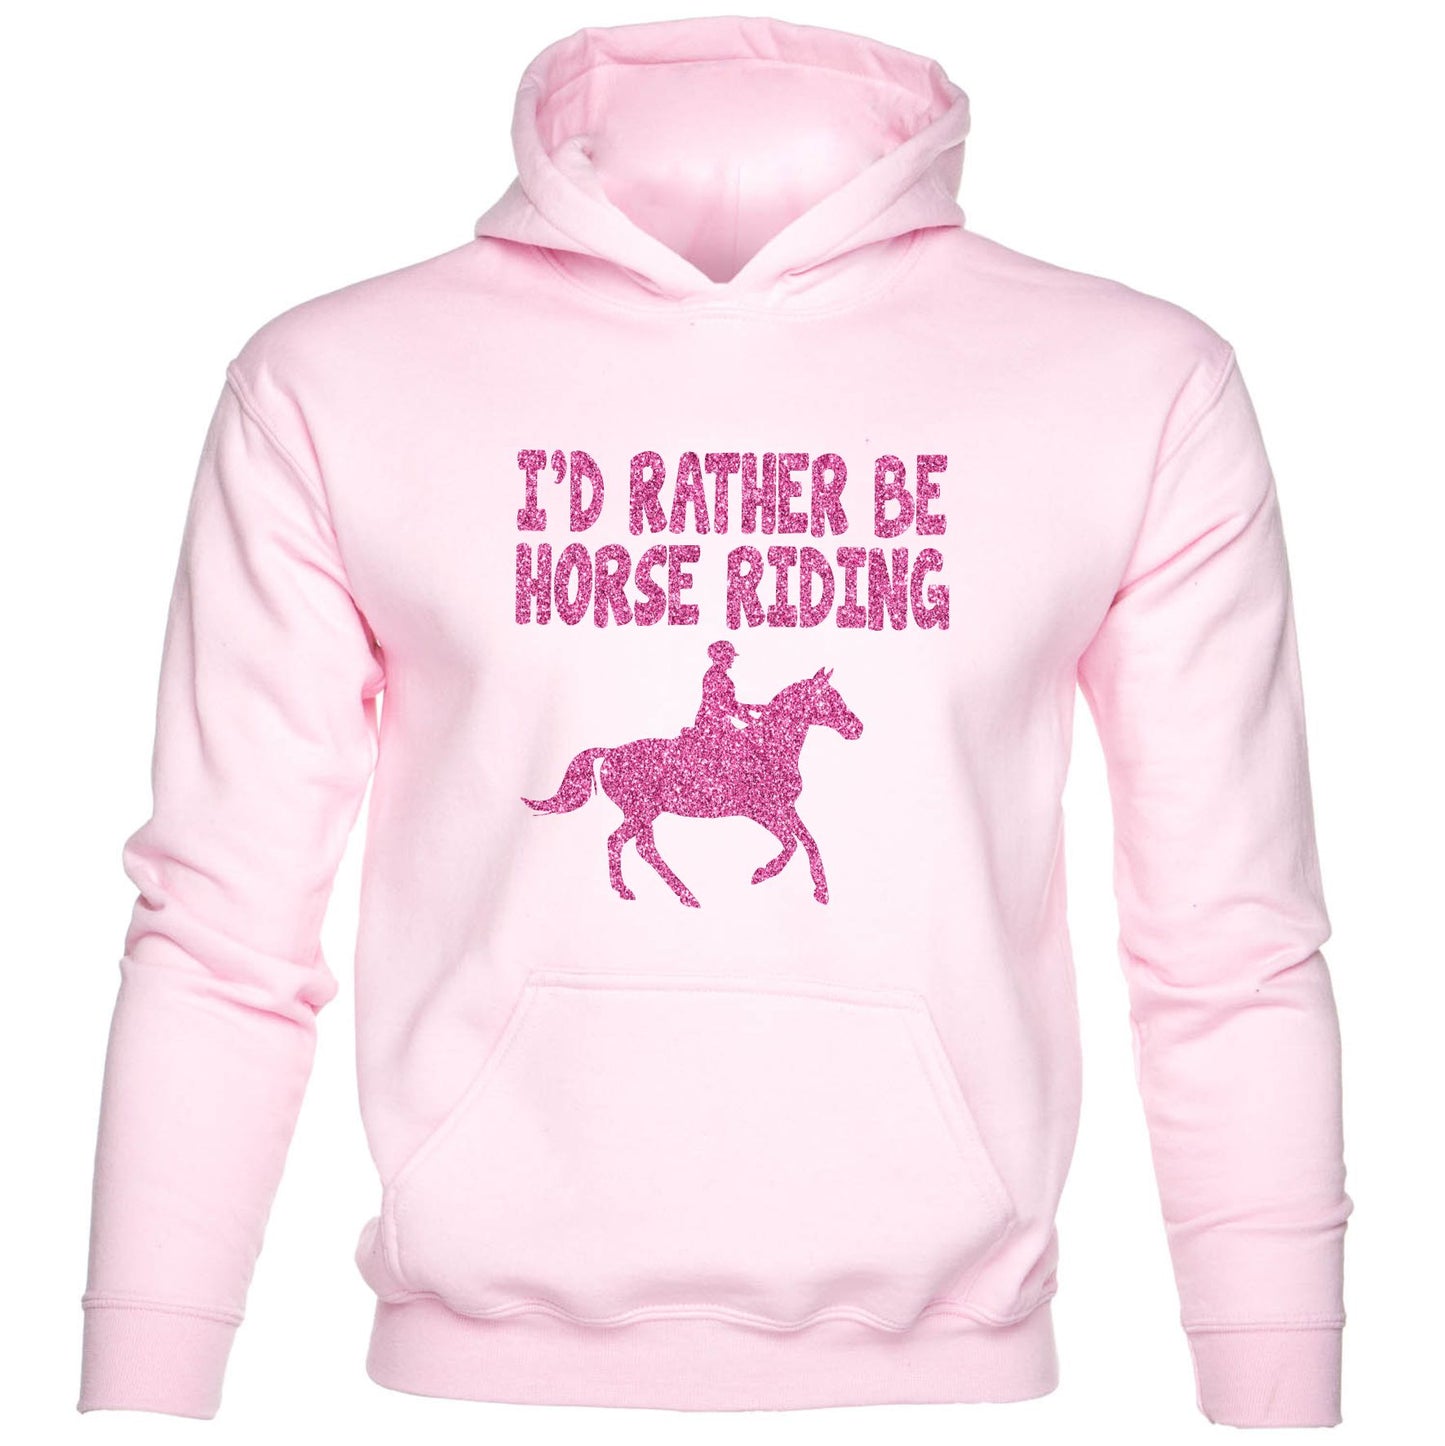 I'd Rather Be Horse Riding Girls Pony Kids Hoodie